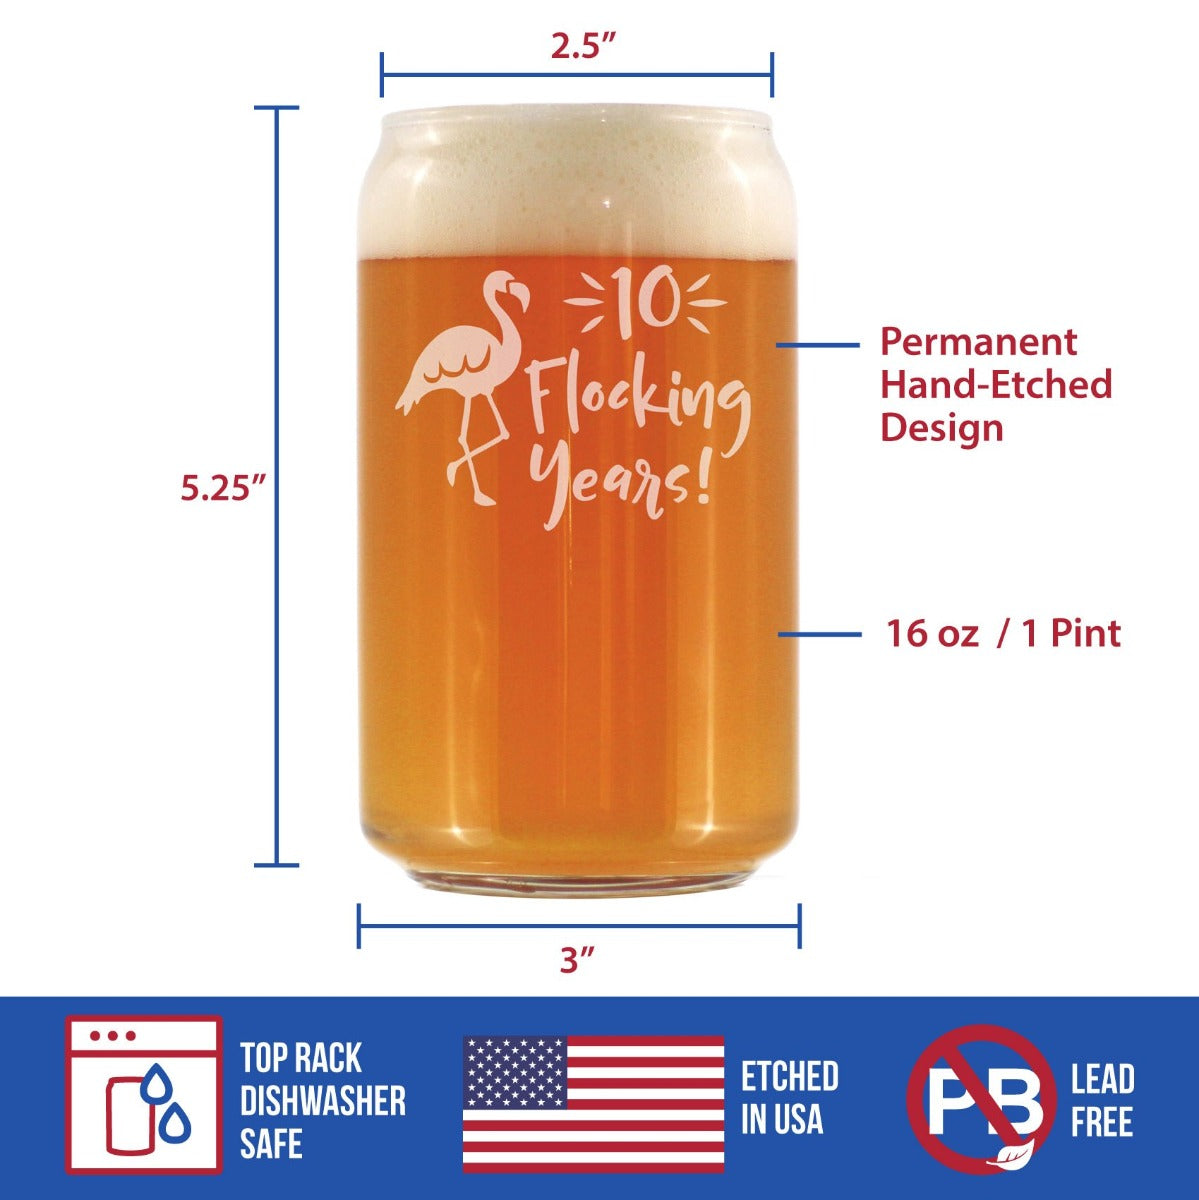 10 Flocking Years - 16 Ounce Beer Can Pint Glass